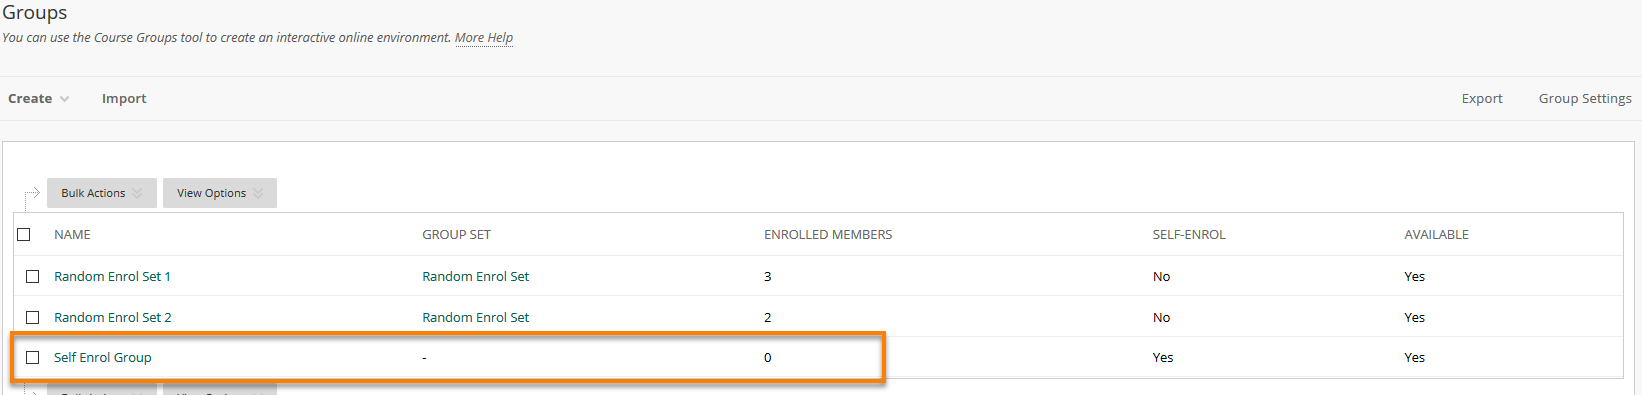 Showing self enrol group in Groups page